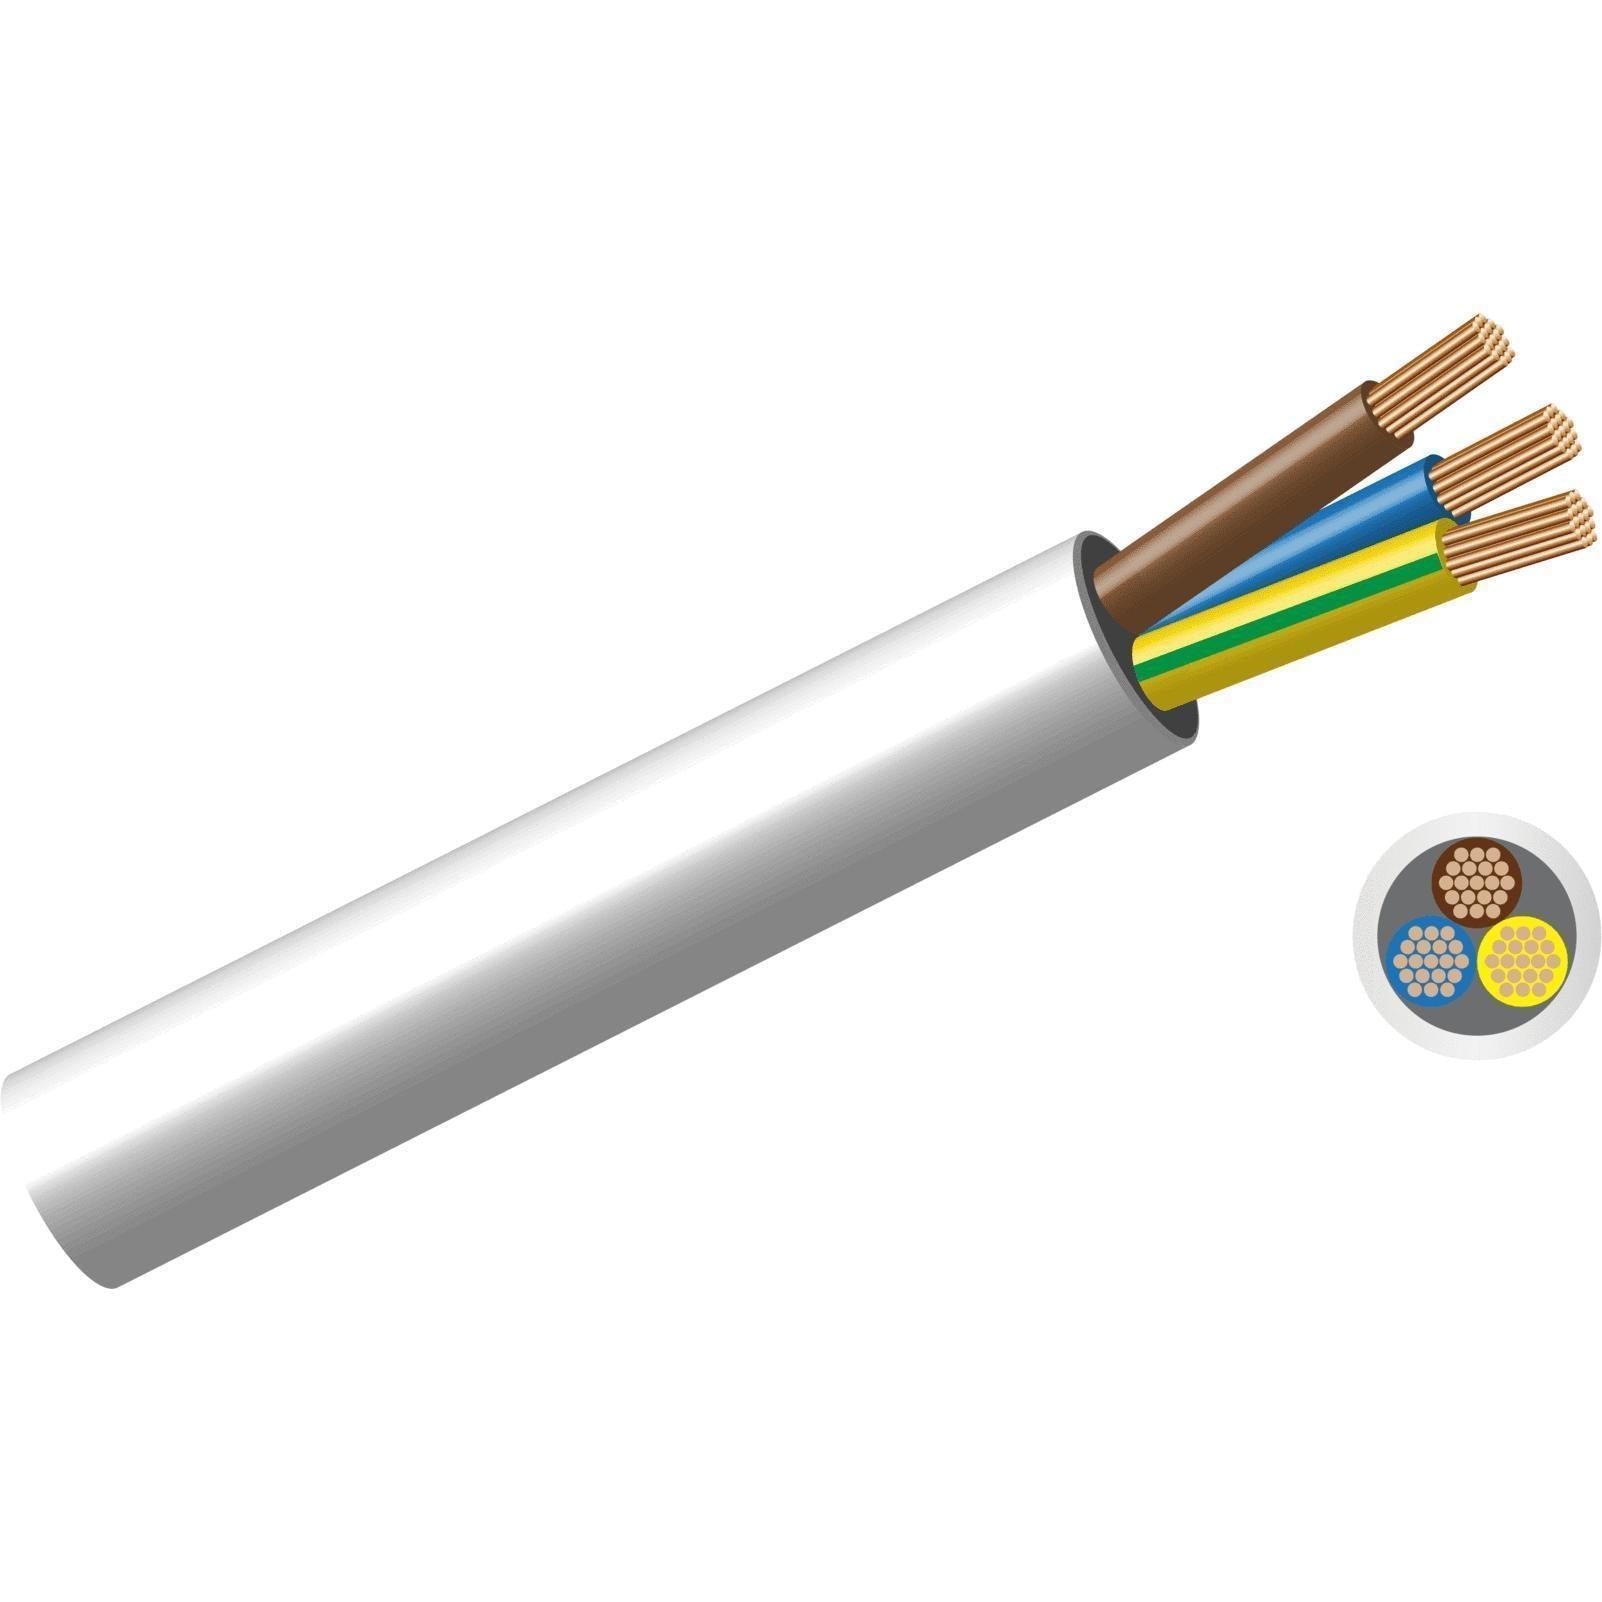 Cable Cabtyre 3Core 𝑝/𝑚eter »-Cables-Private Label Electrical-1.0mm²-White-diyshop.co.za